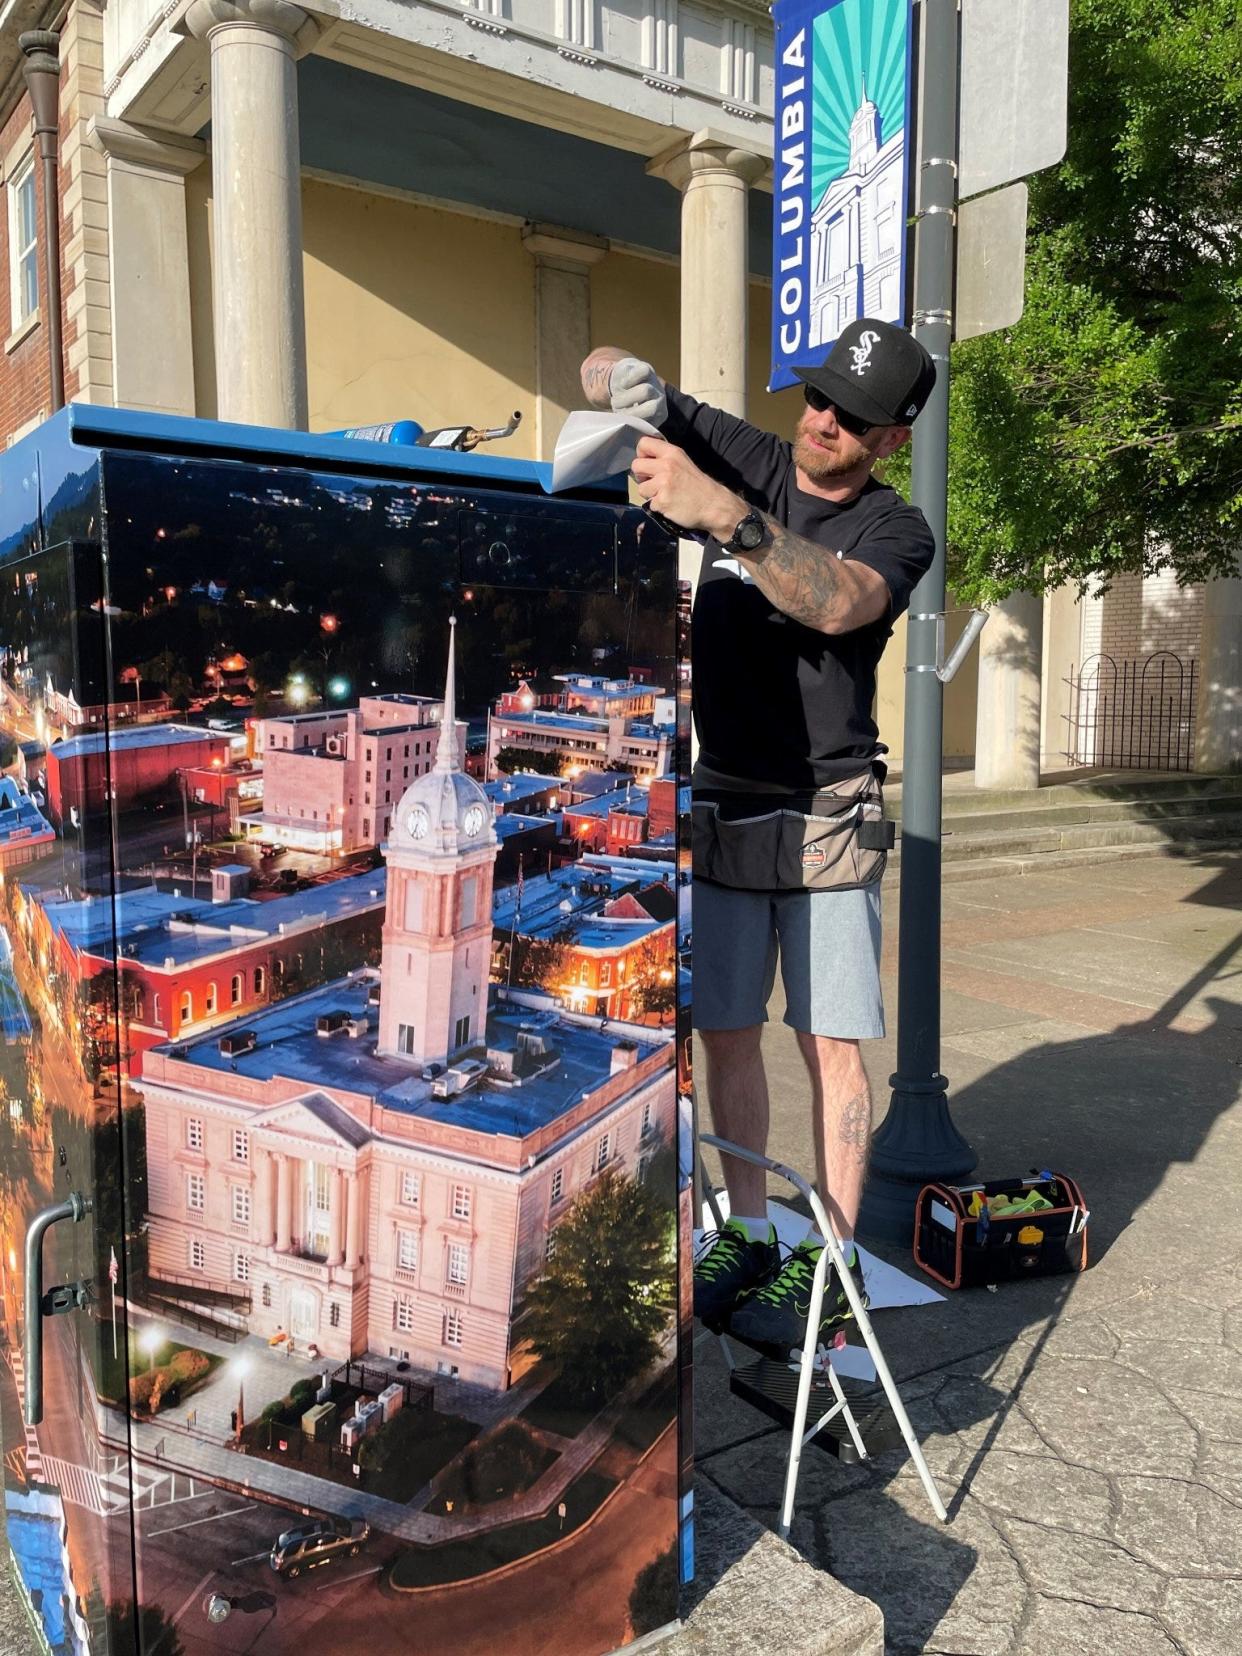 A vinyl art blanket featuring the Maury County Courthouse photographed by Ross Jaynes is installed as part of a new public arts project by the Columbia Arts Council.